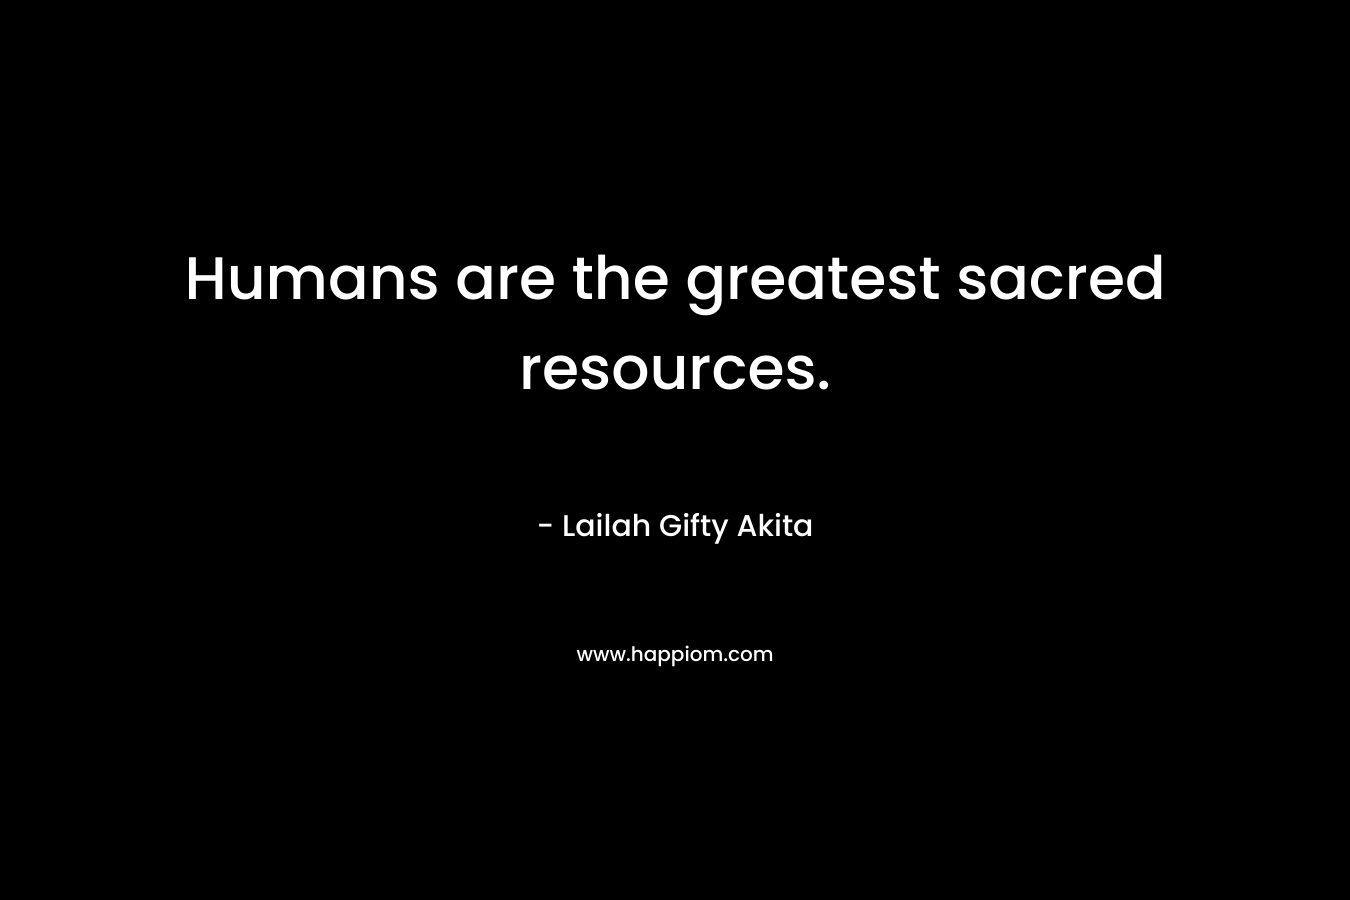 Humans are the greatest sacred resources.